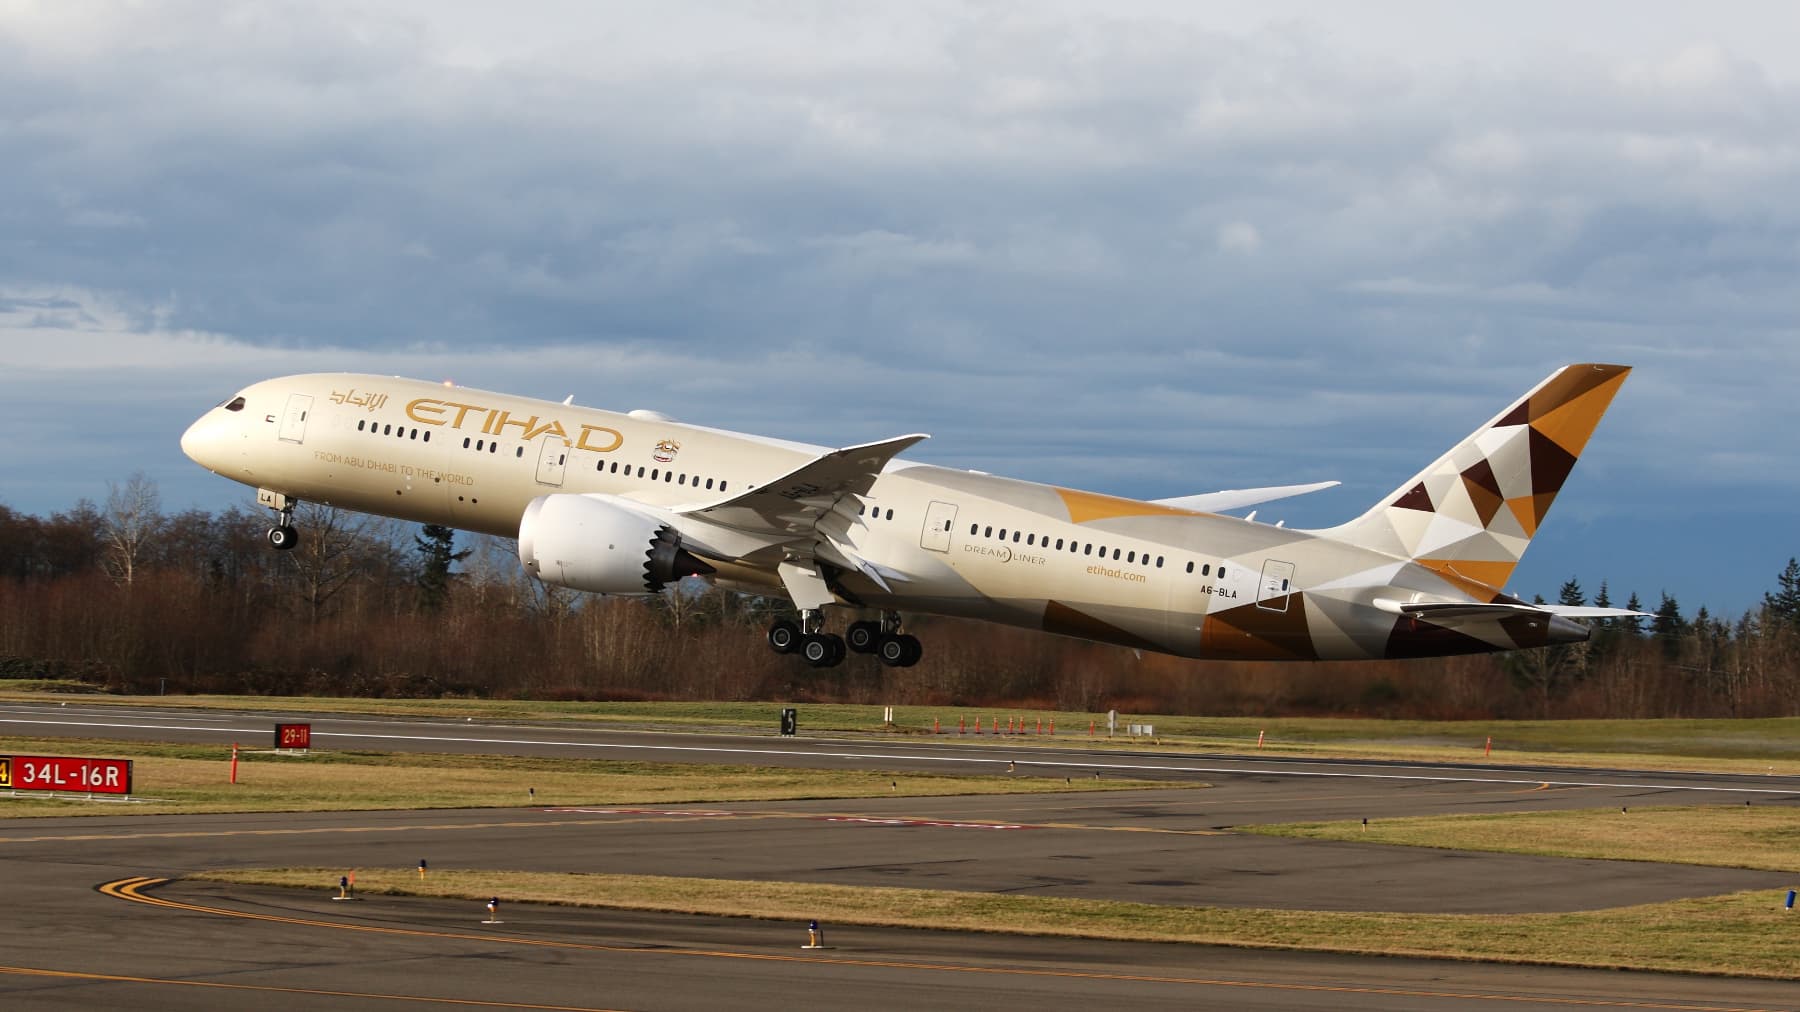  Etihad Airways introduced the revolutionary Boeing 787 Dreamliner to its non-stop direct route betweenAbu Dhabi International Airport & Washington Dulles International Airport, Washington, DC. Industry leading interior and service with environmentally friendly low carbon & noise reduction innovative technology.  #UAEUSA http://ow.ly/3xweGH